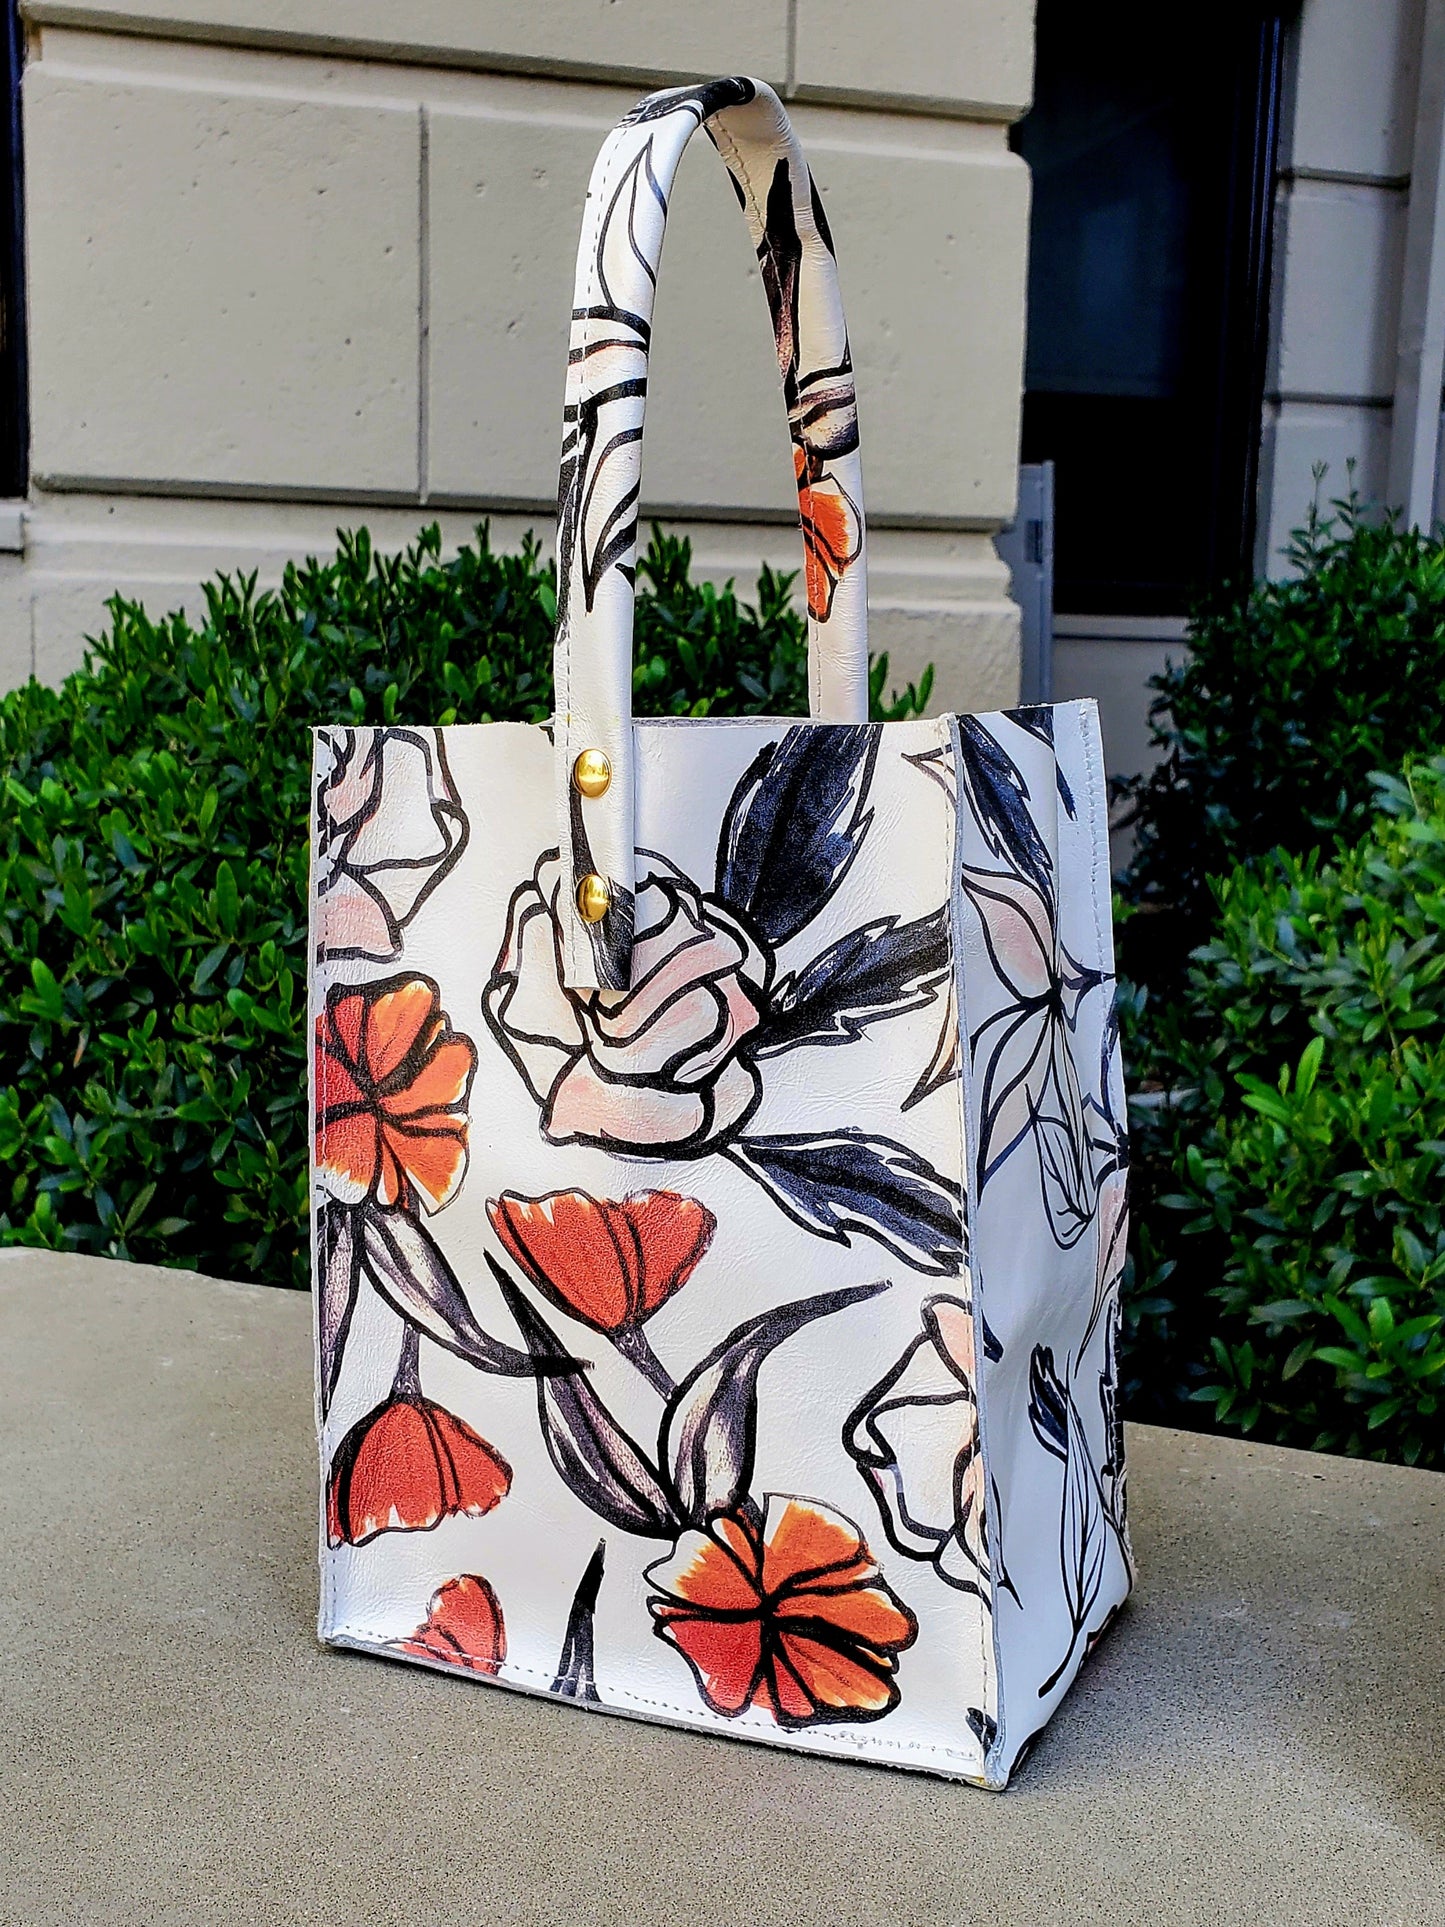 Leather Square bag in white,red,black flowers with 1 handle. Handcrafted in Los Angeles, California 